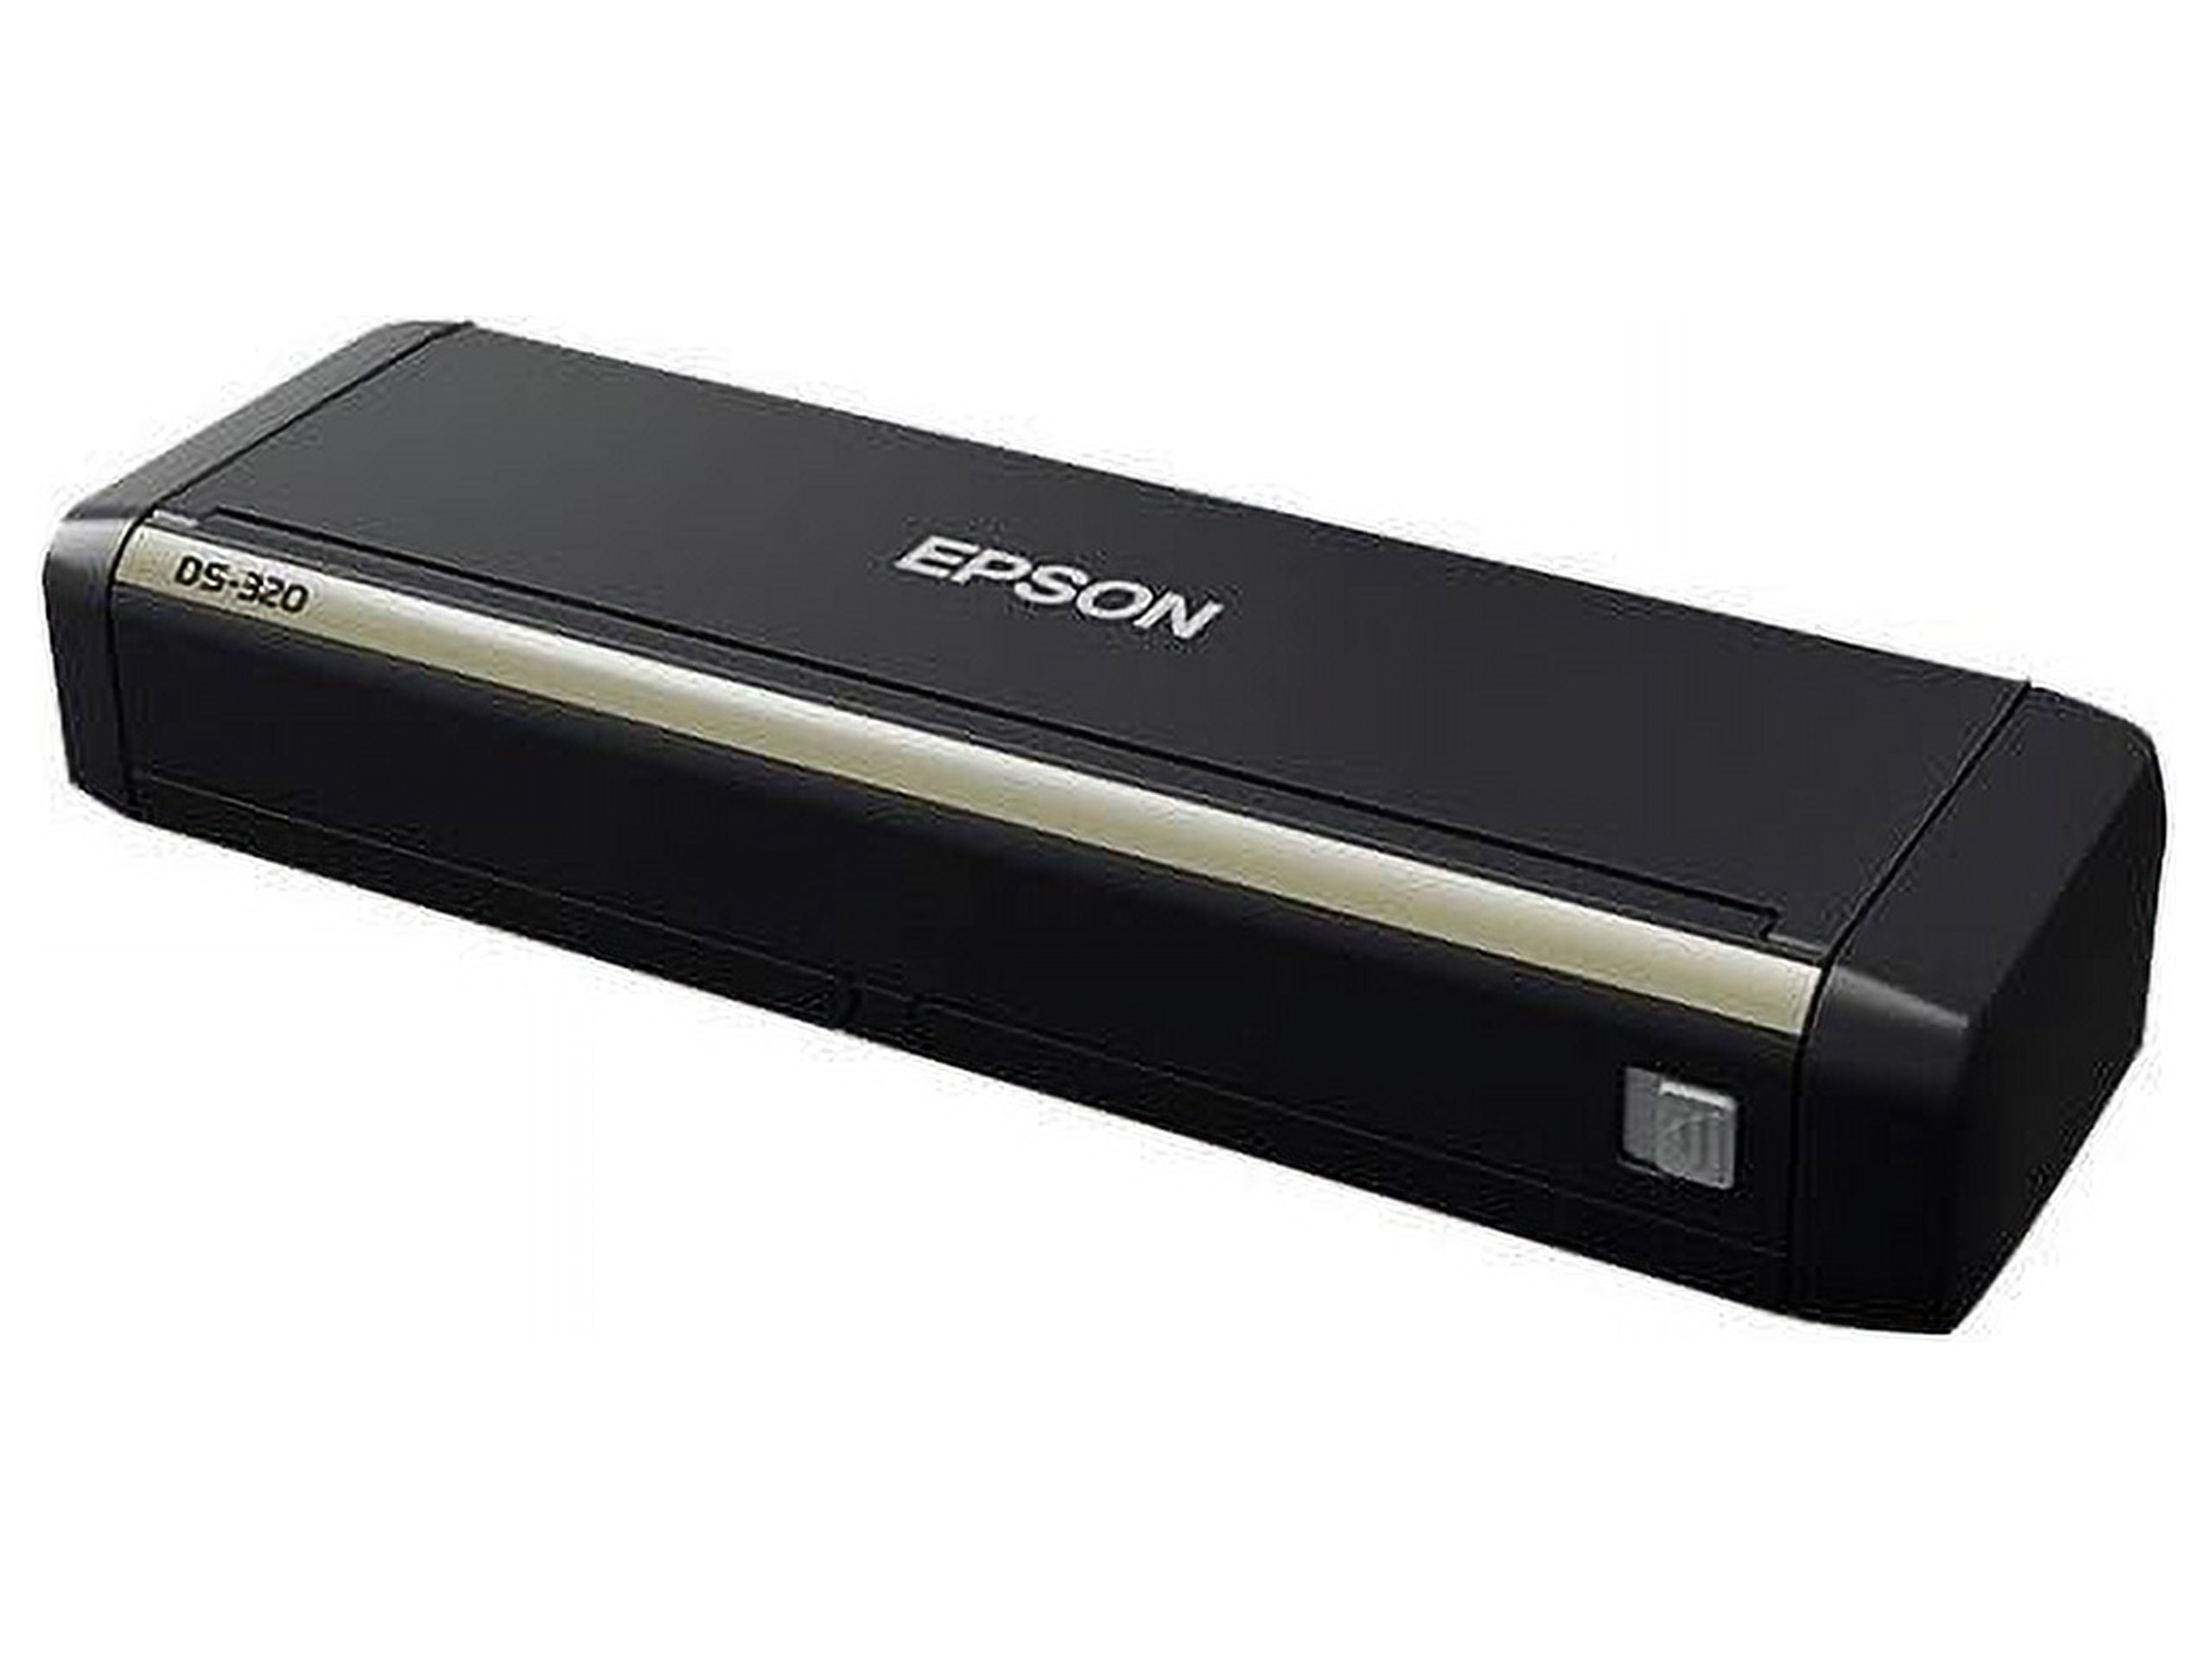 Picture of Epson America DS320EPSON Portable Duplex Document Scanner with ADF